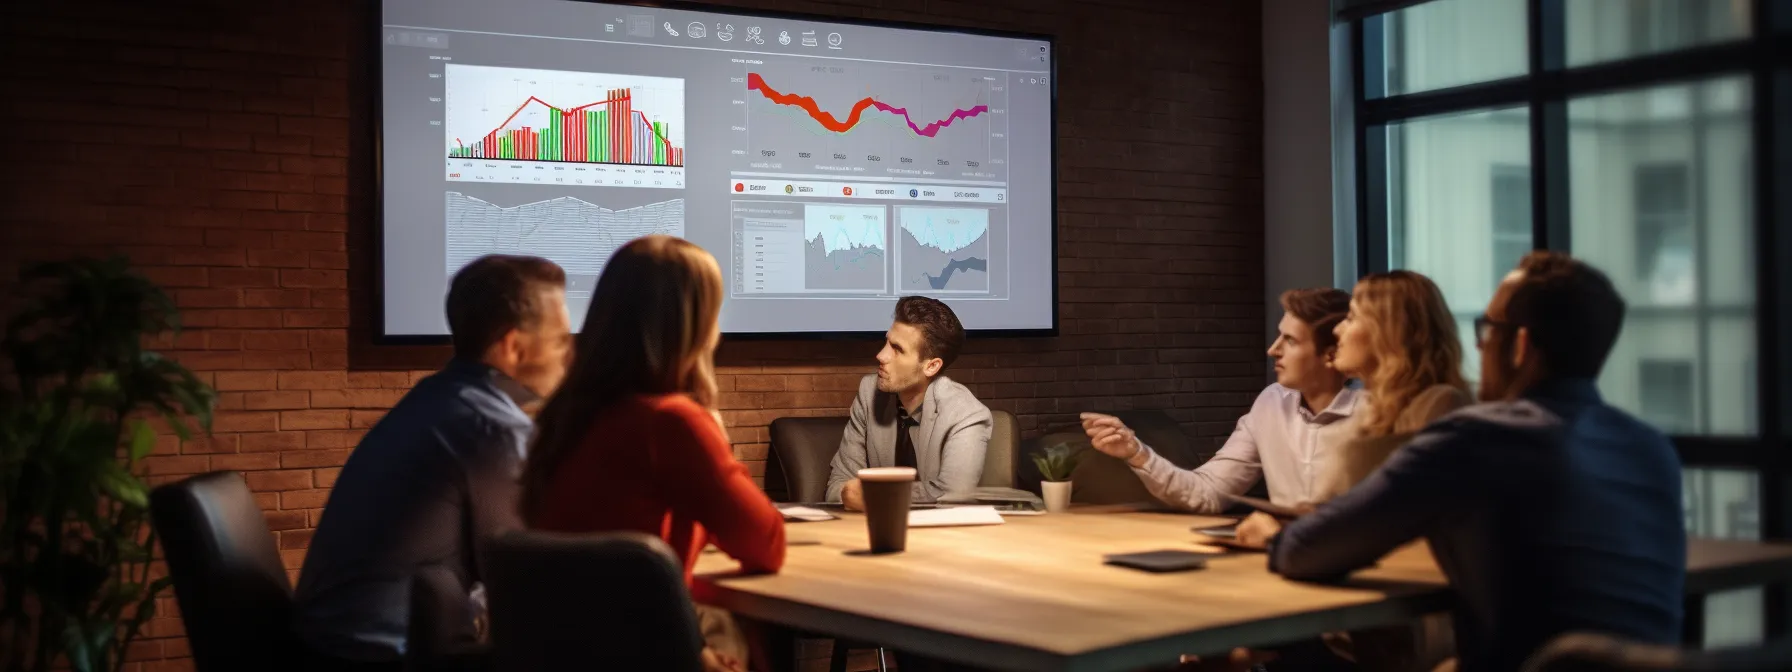 a group of marketers analyzing charts and graphs on a large screen, discussing and brainstorming about the latest trends in social media seo.